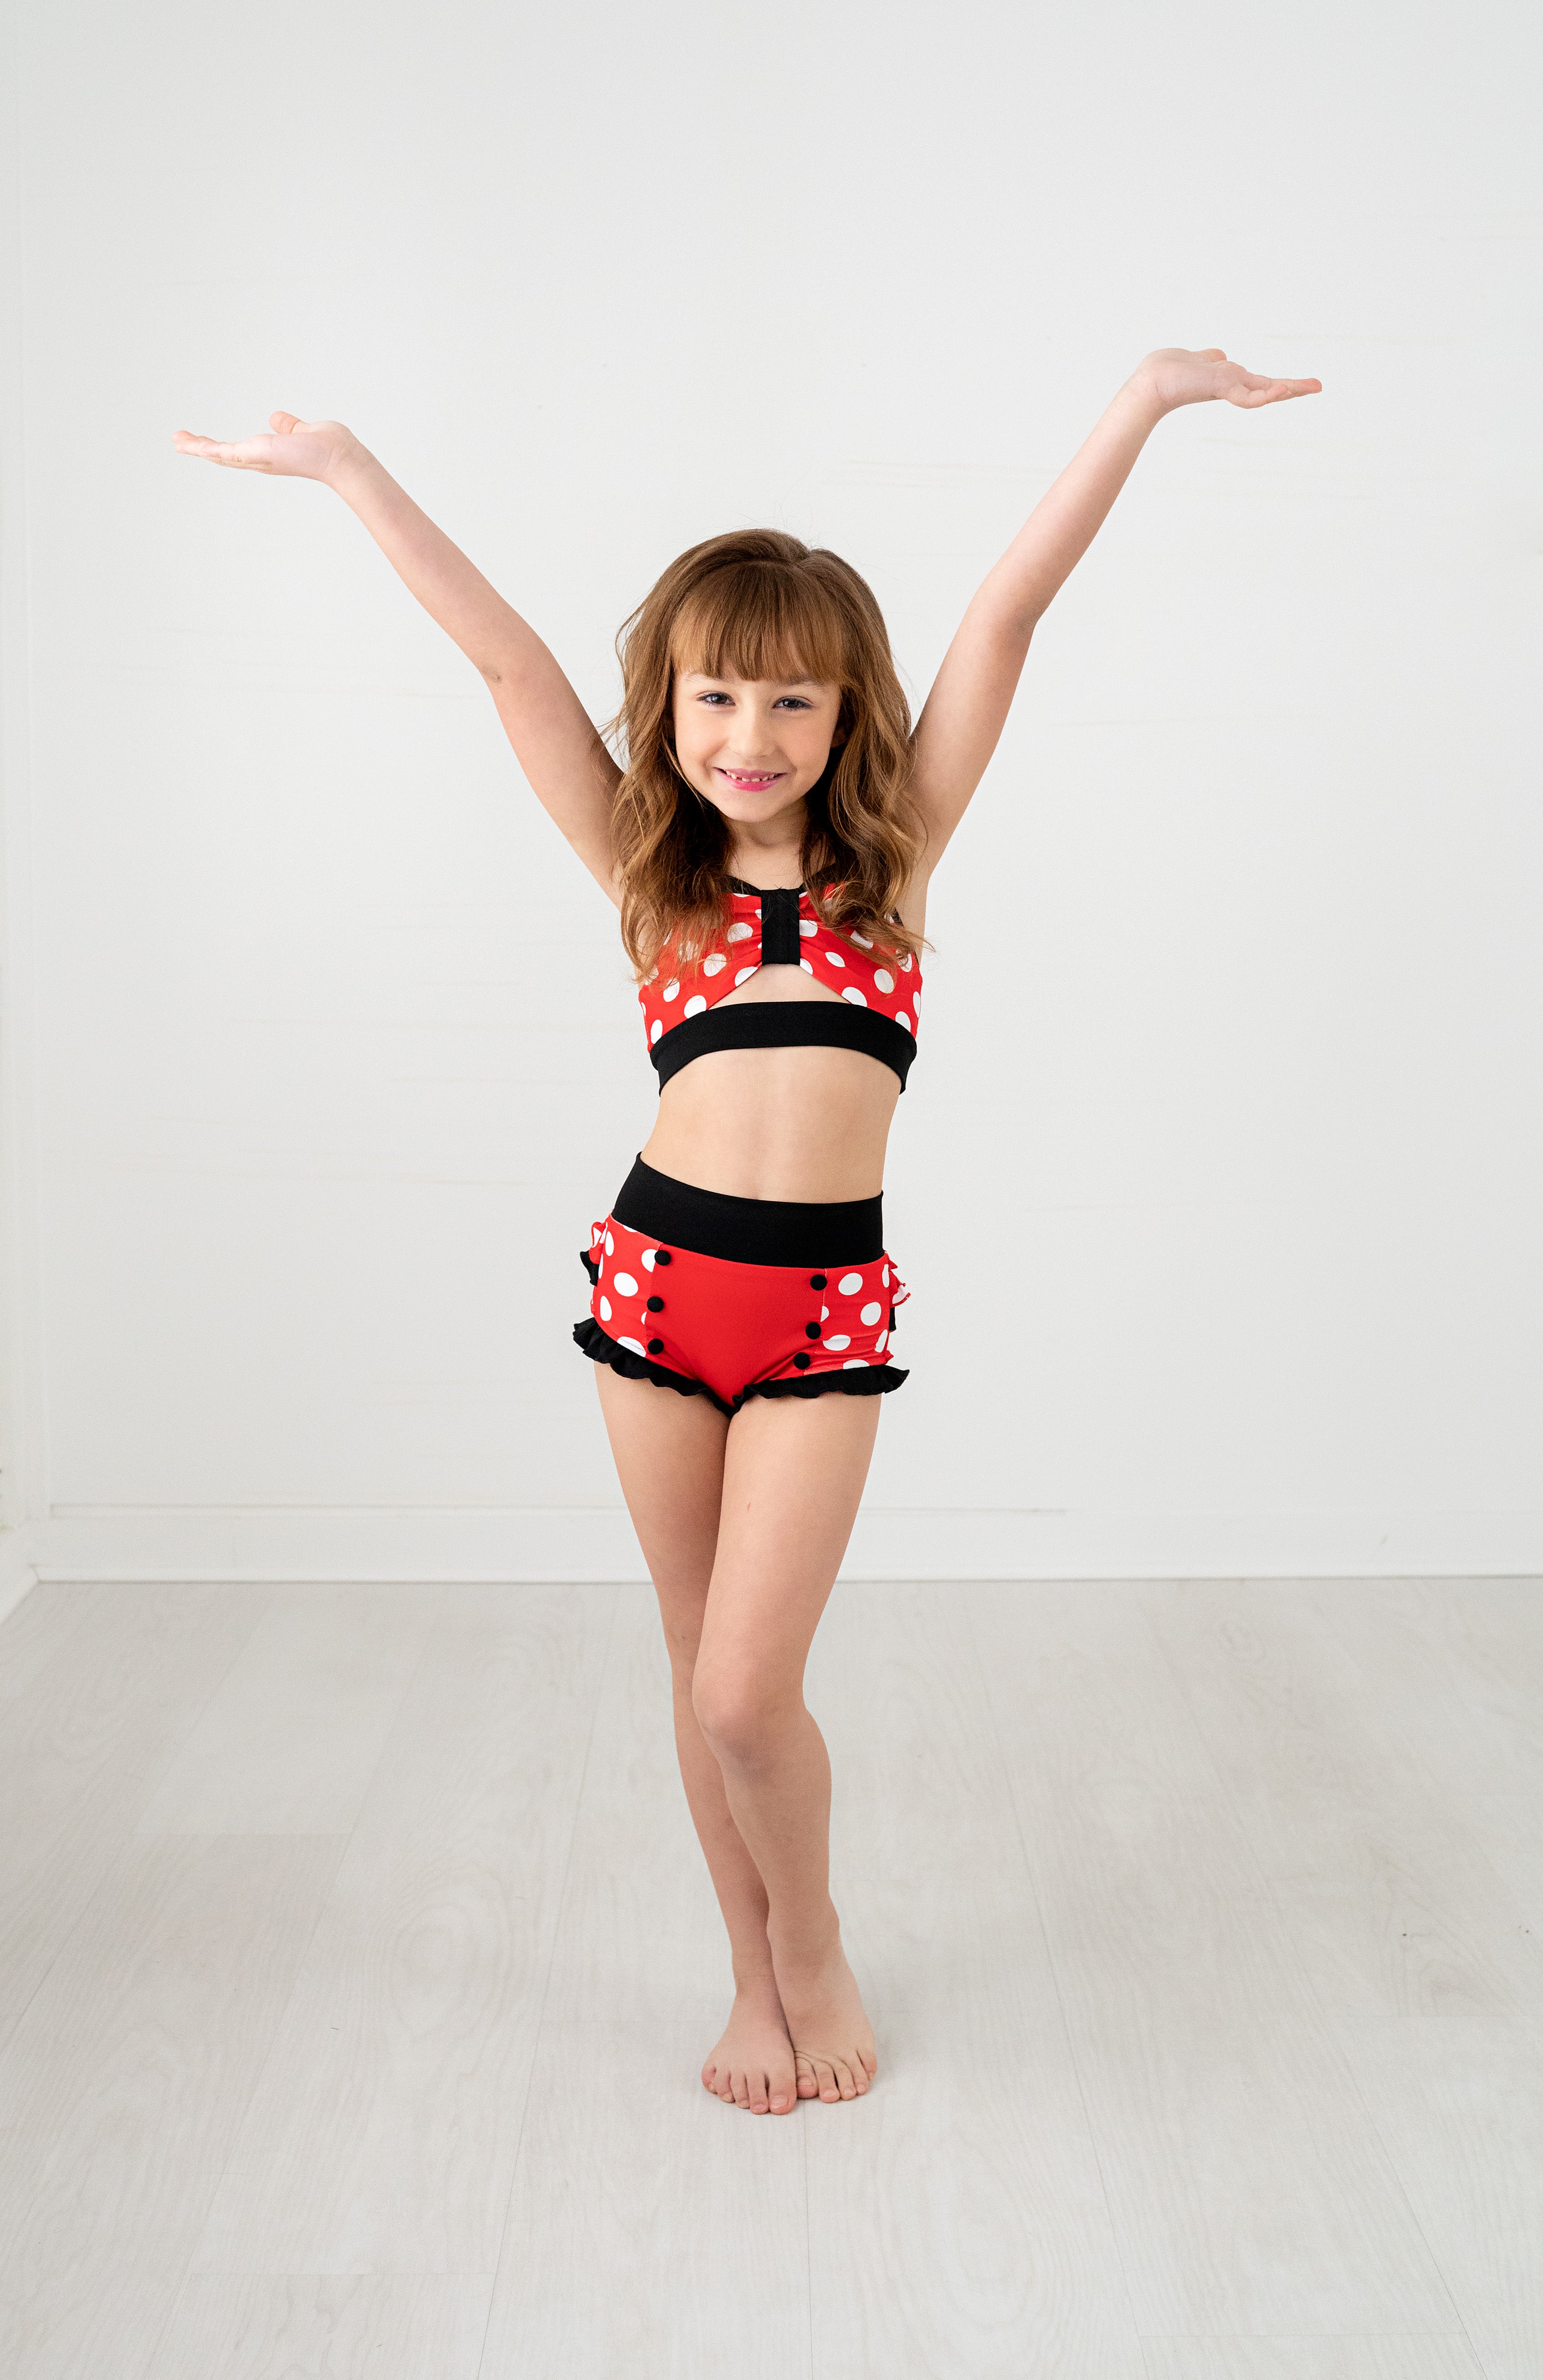 Sweetheart Red, Black, and White Polka Dotted Dance/Swim Set